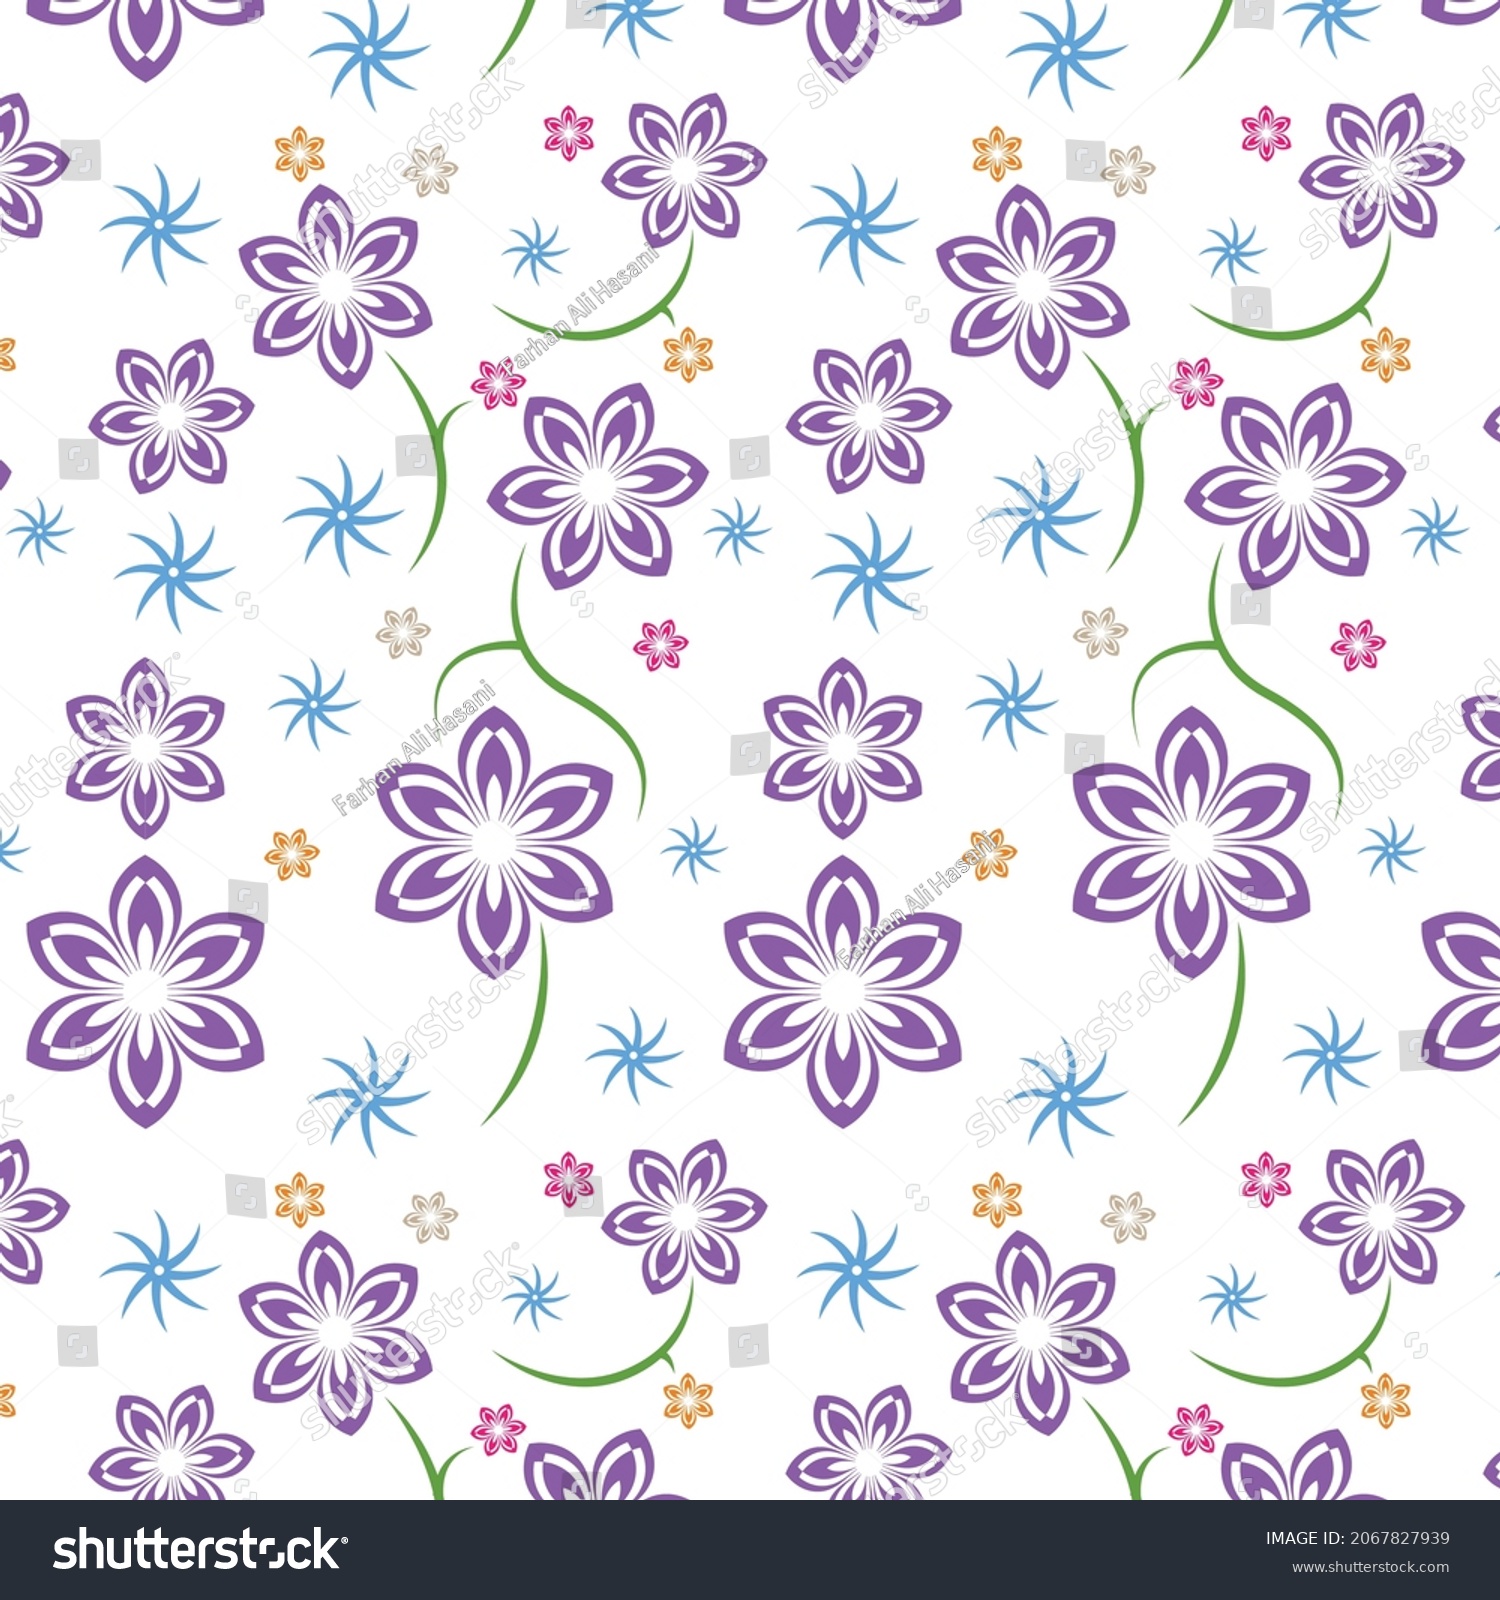 SVG of Printable seamless flower pattern with different beautiful random colors. Can be used on cute clothing for girls or on other feminine projects as well as spring posts that represents nature.  svg